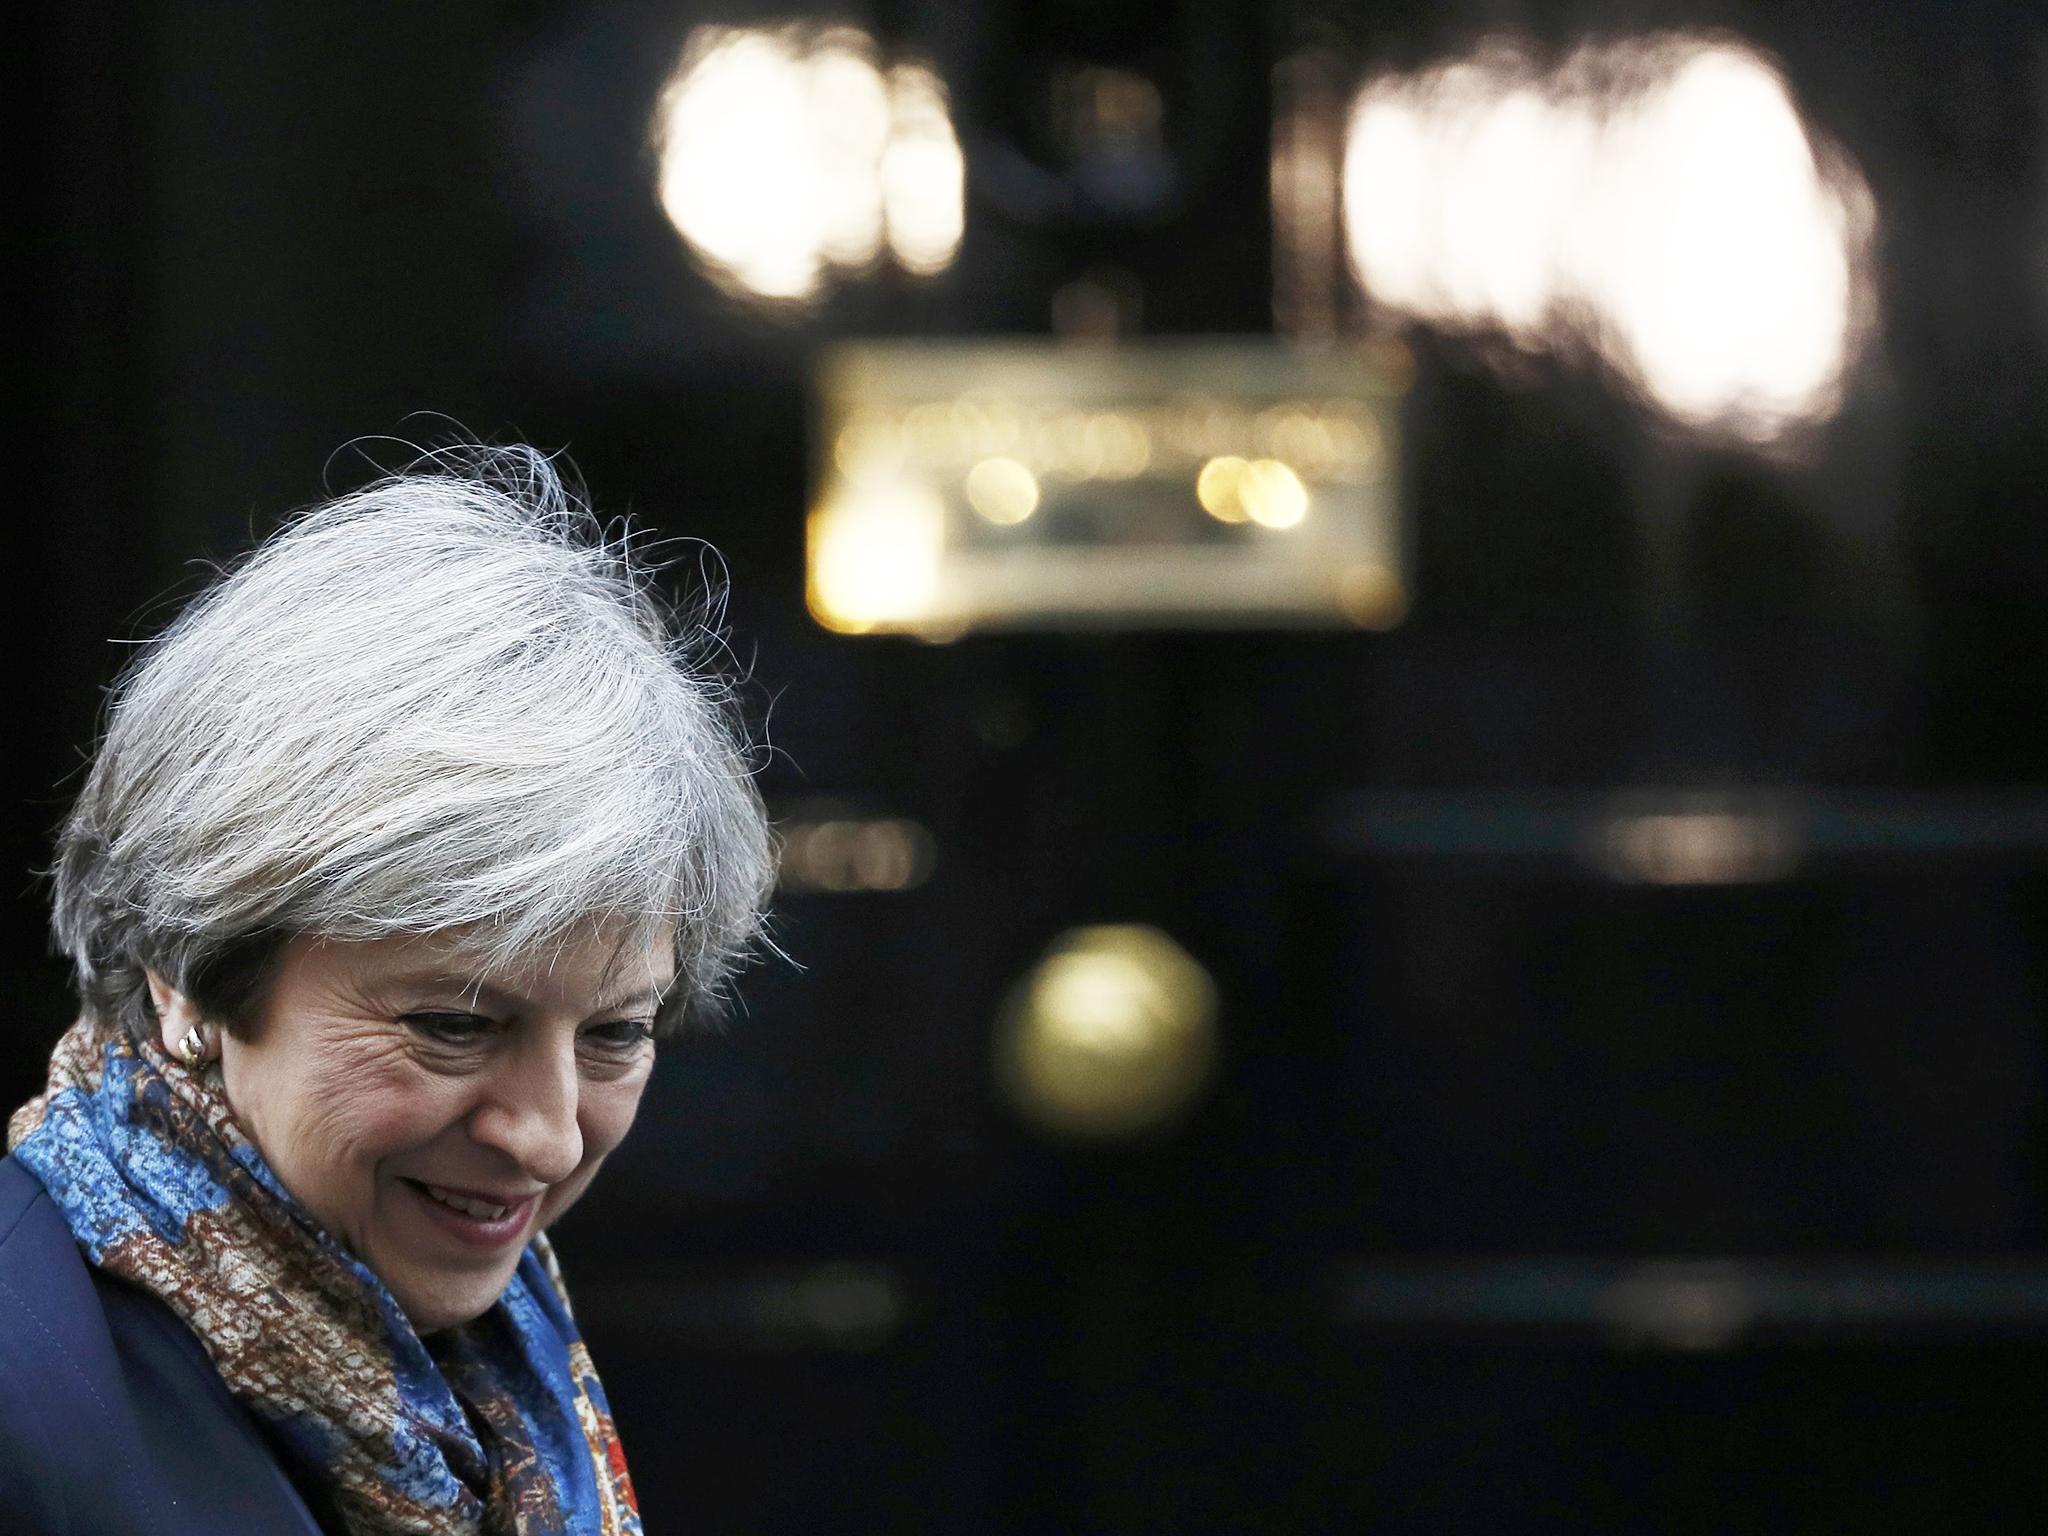 May blocked no fewer than 40 per cent of FoI requests in her last year as Home Secretary